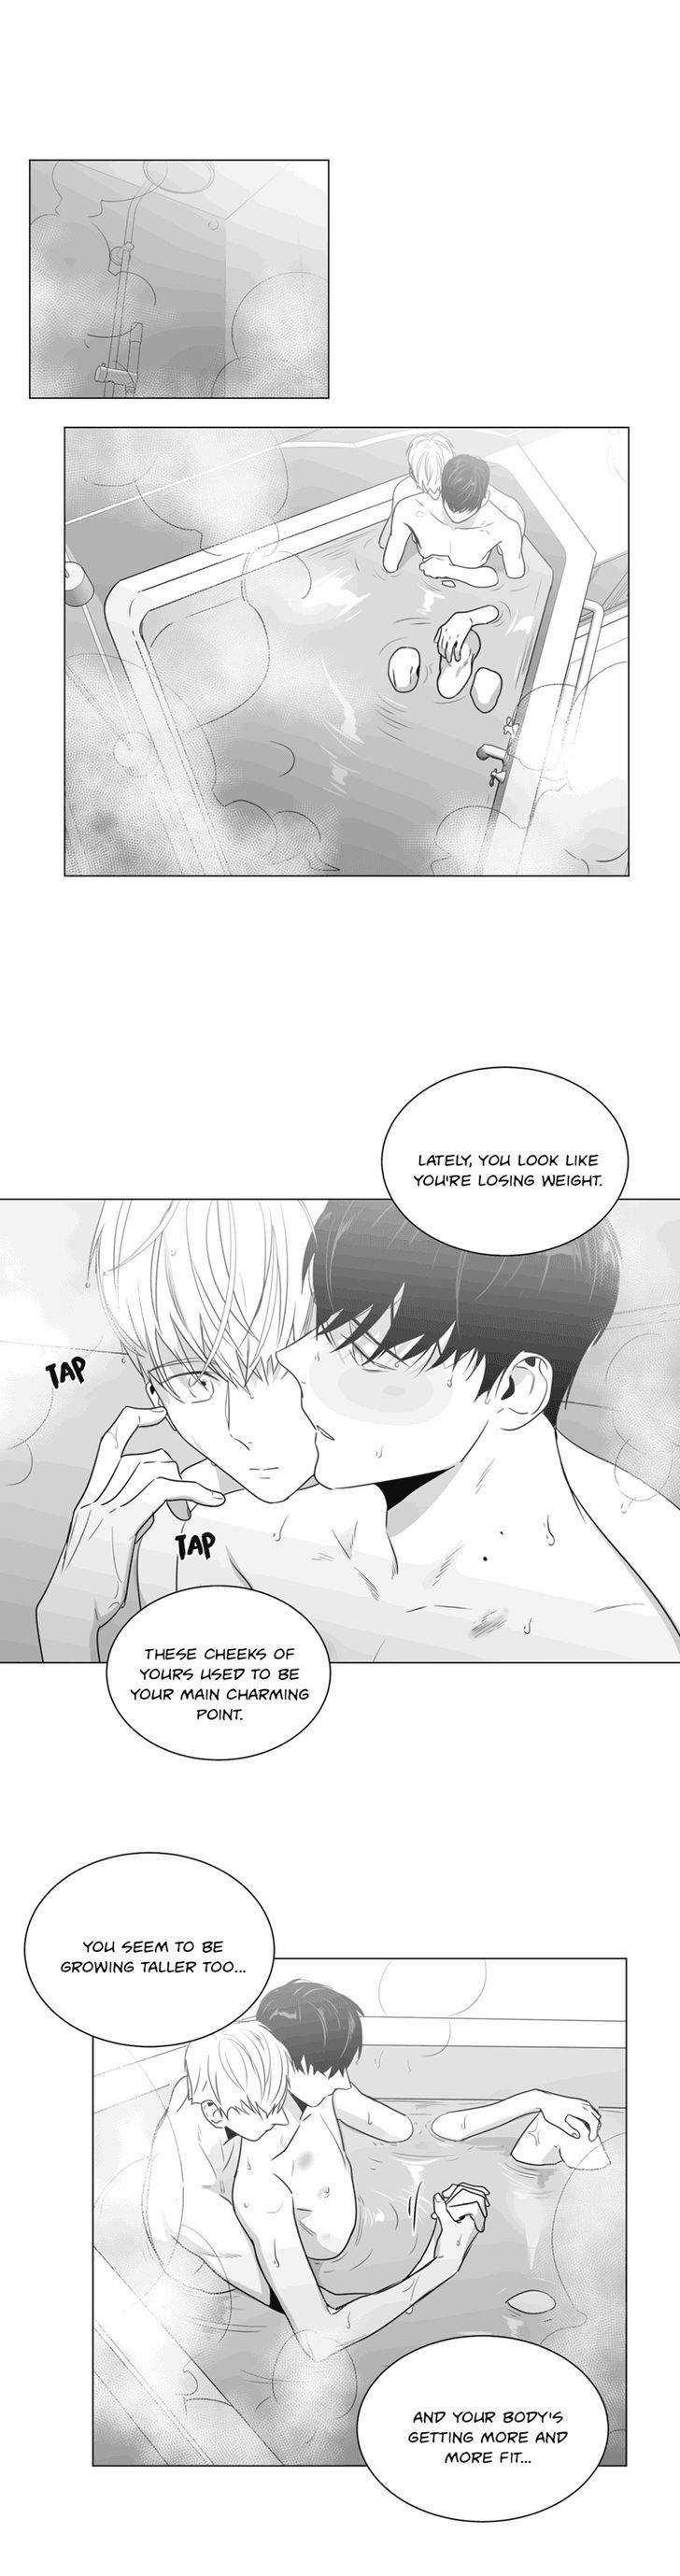 Lover Boy (Lezhin) Chapter 035 page 3